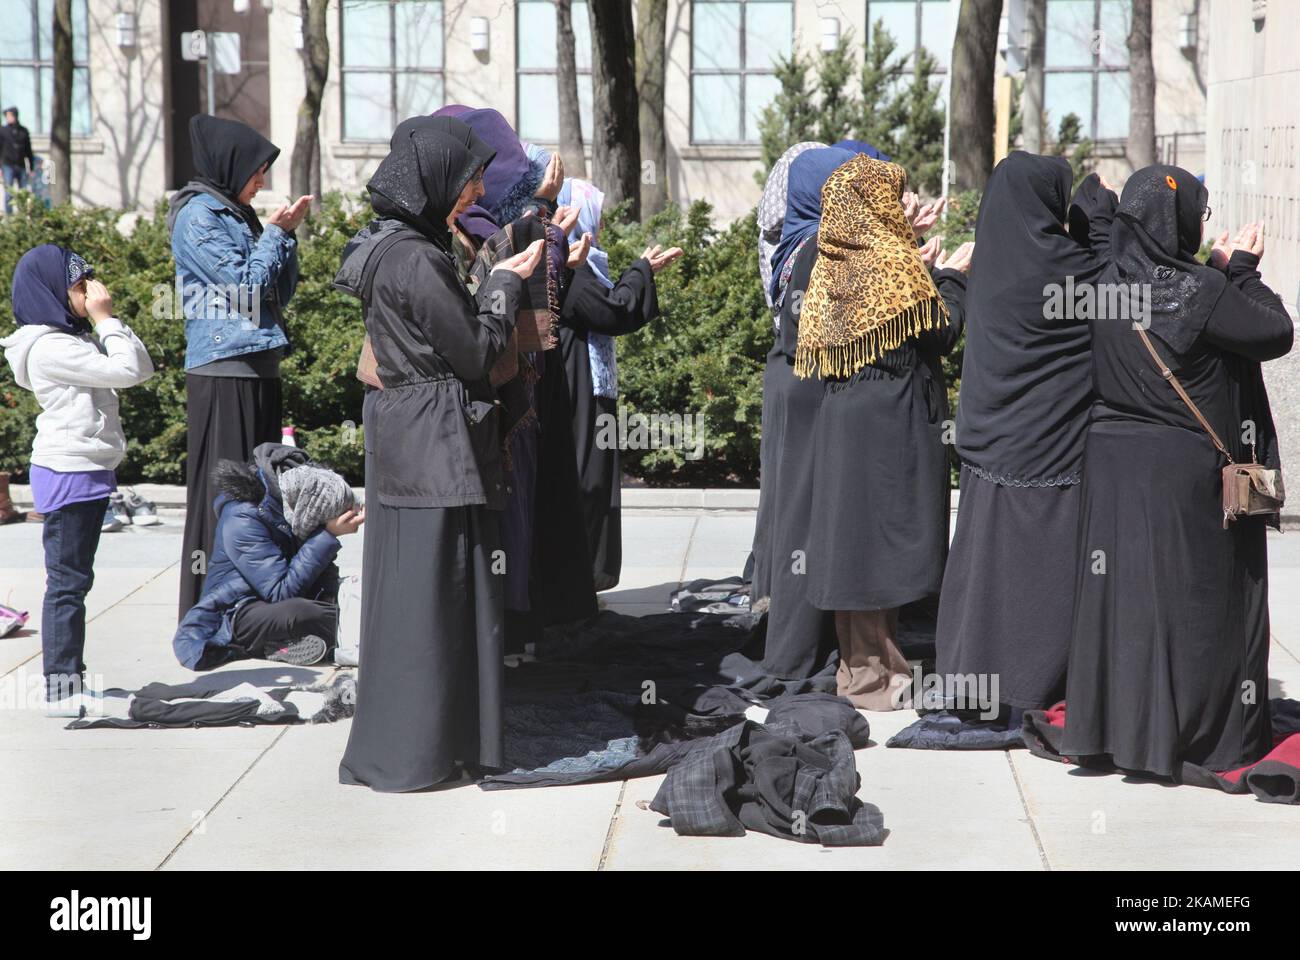 Muslim women perform prayers during a protest against US President Donald Trump's decision to launch airstrikes against Syria on April 8, 2017 in Toronto, Ontario Canada. Protestors gathered to outside the American Consulate in Toronto to denounce this week's airstrikes against the Syrian regime. America launched a missile strike against Syria for the first time since the civil war began, targeting an airbase in the small town of Idlib from which the United States claims this week’s chemical weapons attack on civilians was launched by Bashar al-Assad’s regime. (Photo by Creative Touch Imaging  Stock Photo